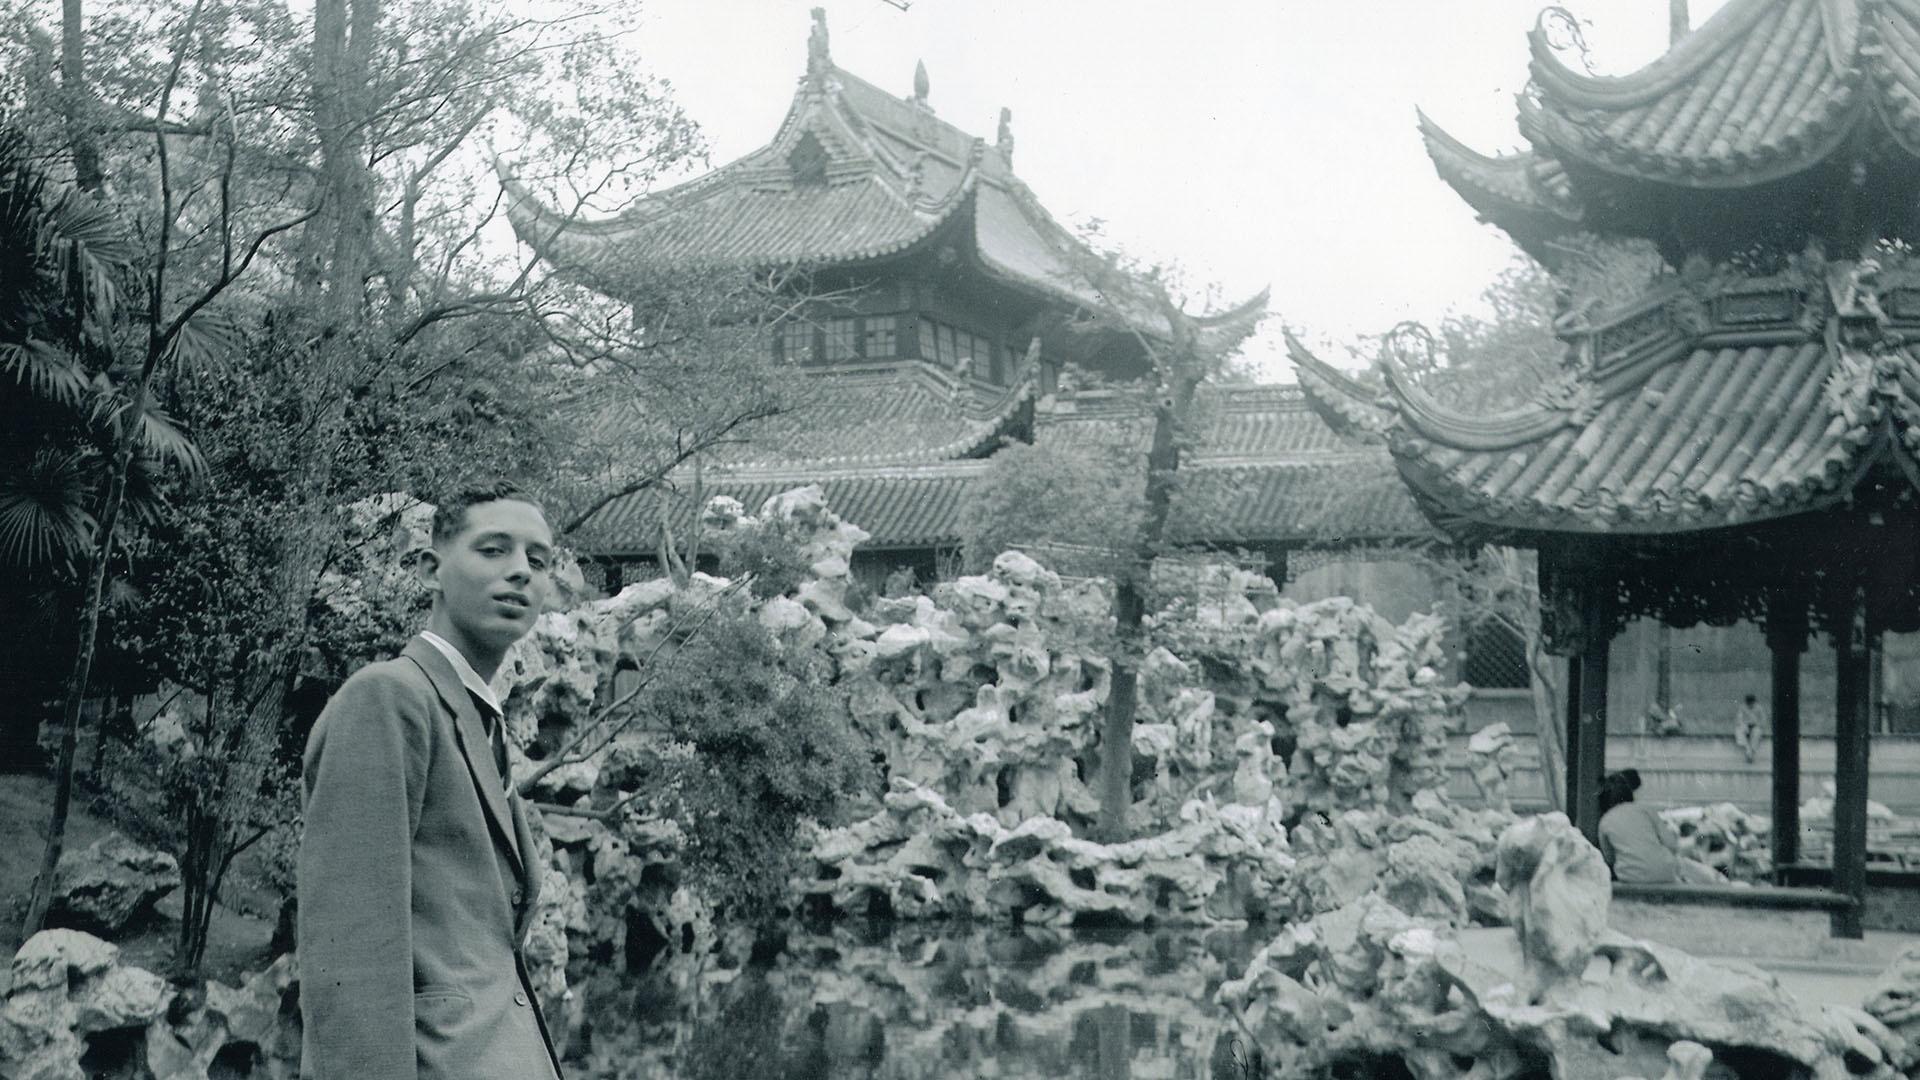 A black and white image of a man in front of a Chinese garden.